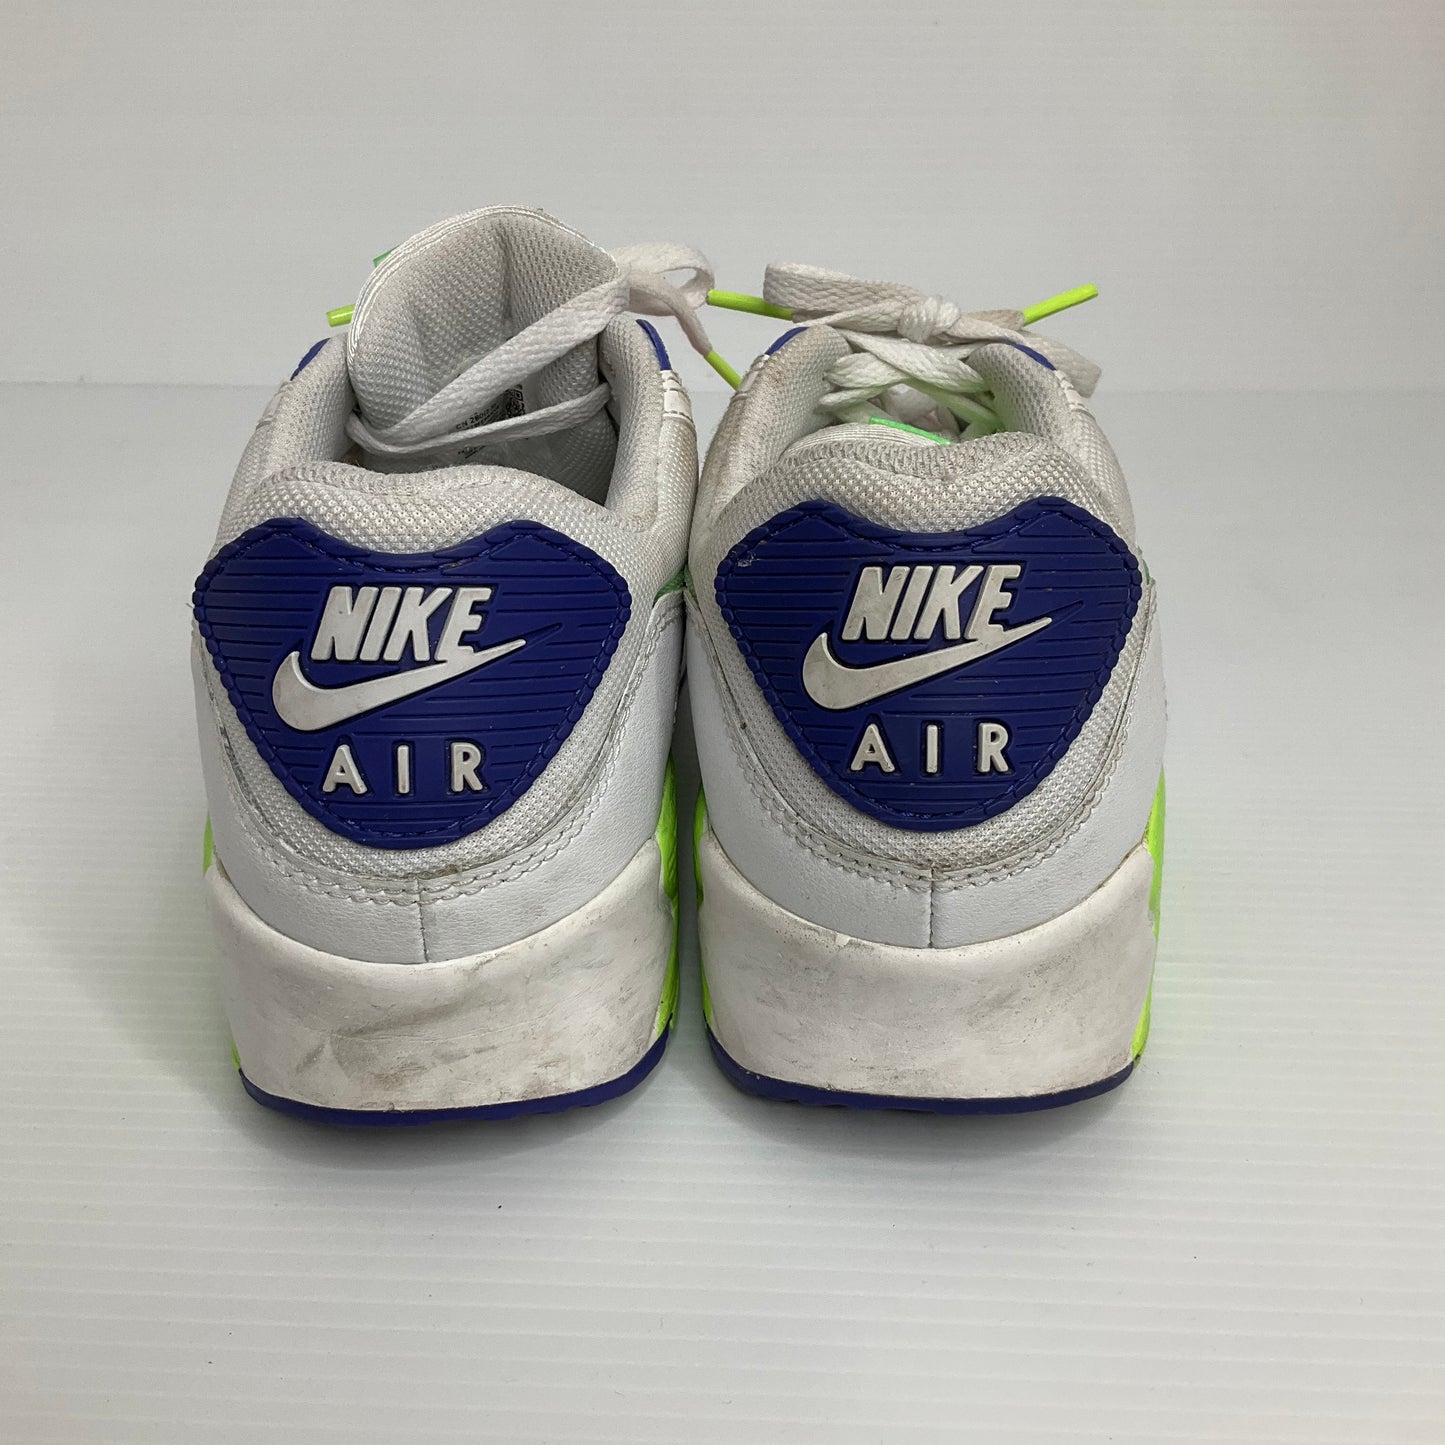 Green & White Shoes Athletic Nike, Size 11